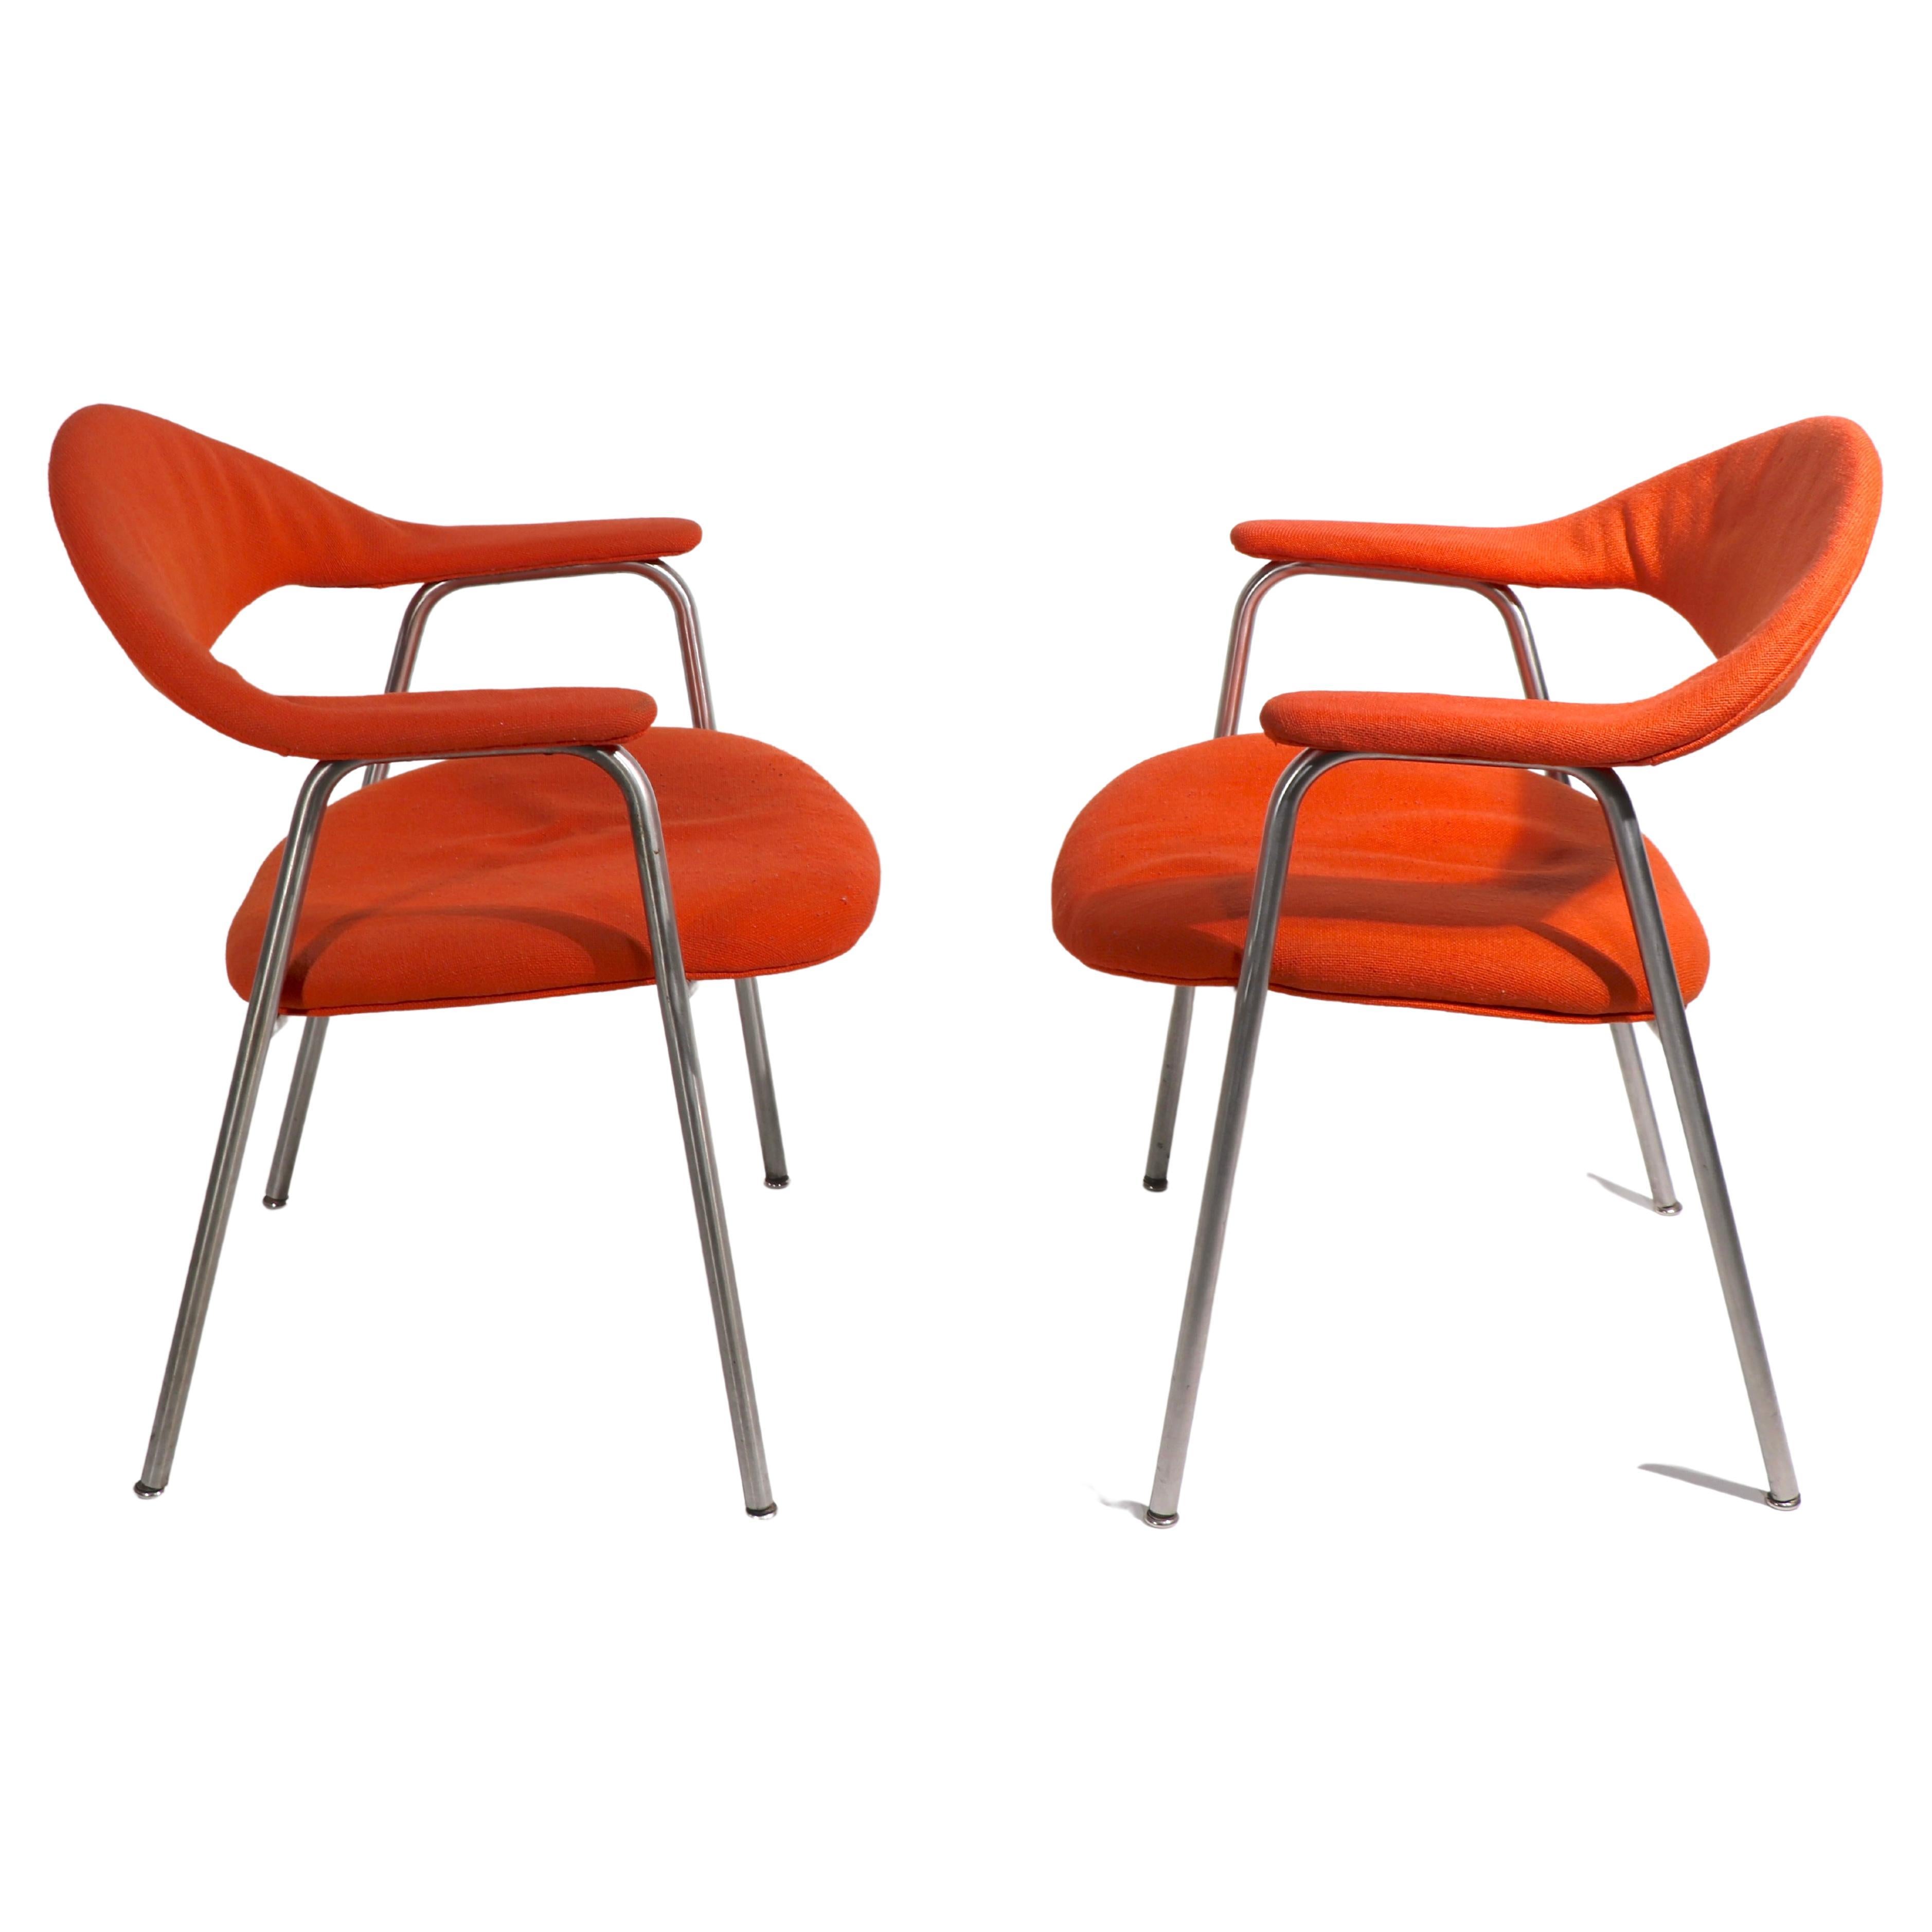 Chic and sophisticated pair of office, dining, occasional chairs made by Marble Imperial Furniture, design attributed to Jens Risom. The chairs have brushed steel frames, and orange tweed fabric, upholstery shows wear and will need to be replaced,